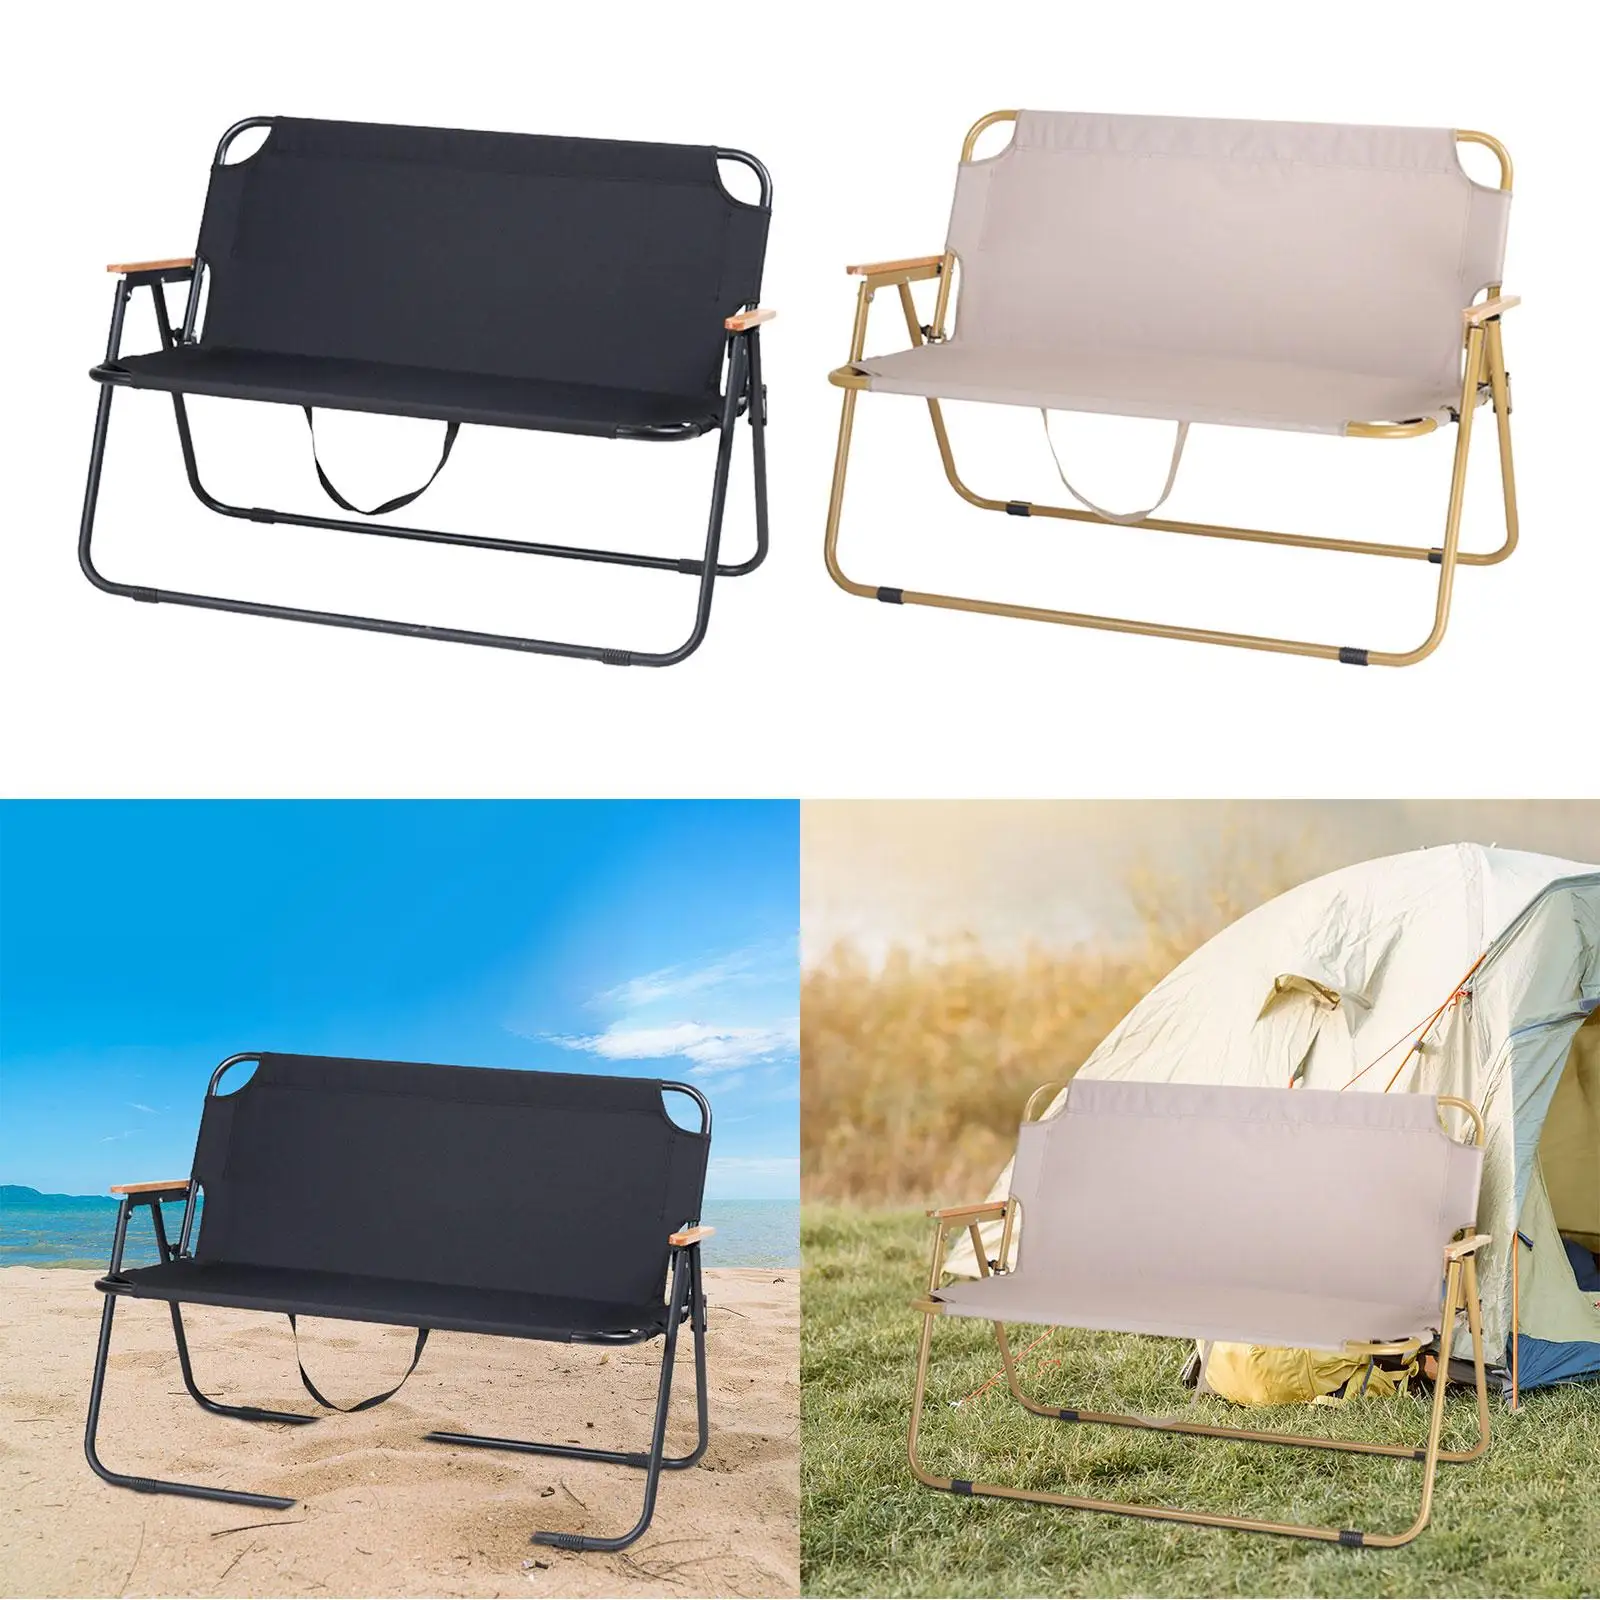 Folding Camping Chair Backpacking Camping Stool Chair Picnic Outdoor Patio Travel Lightweight Fishing Camp Chair Beach Chair